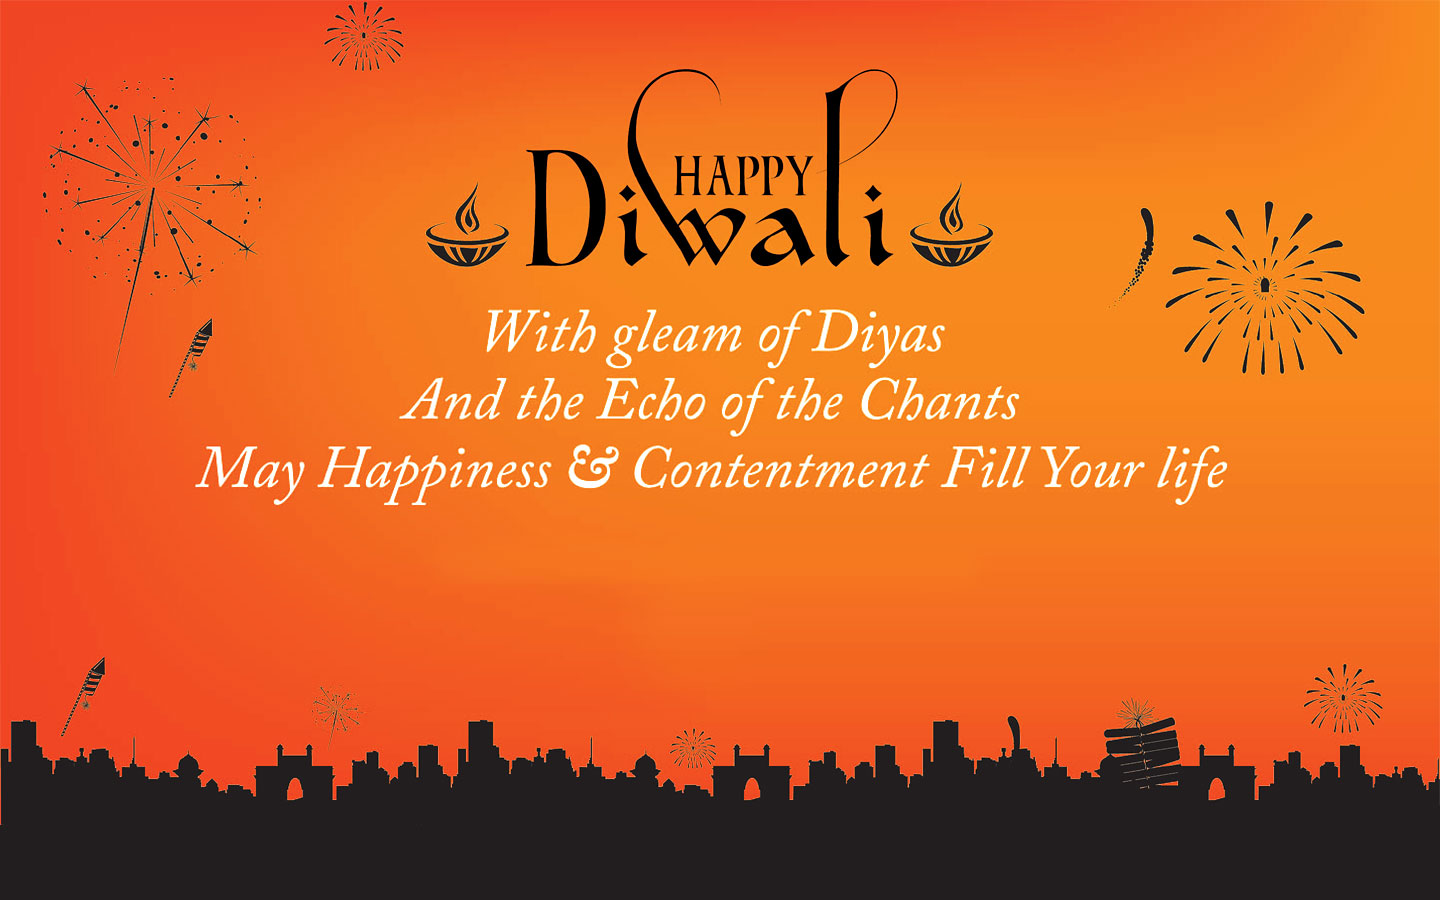 diwali-wishes-greetings-messages-friends-family